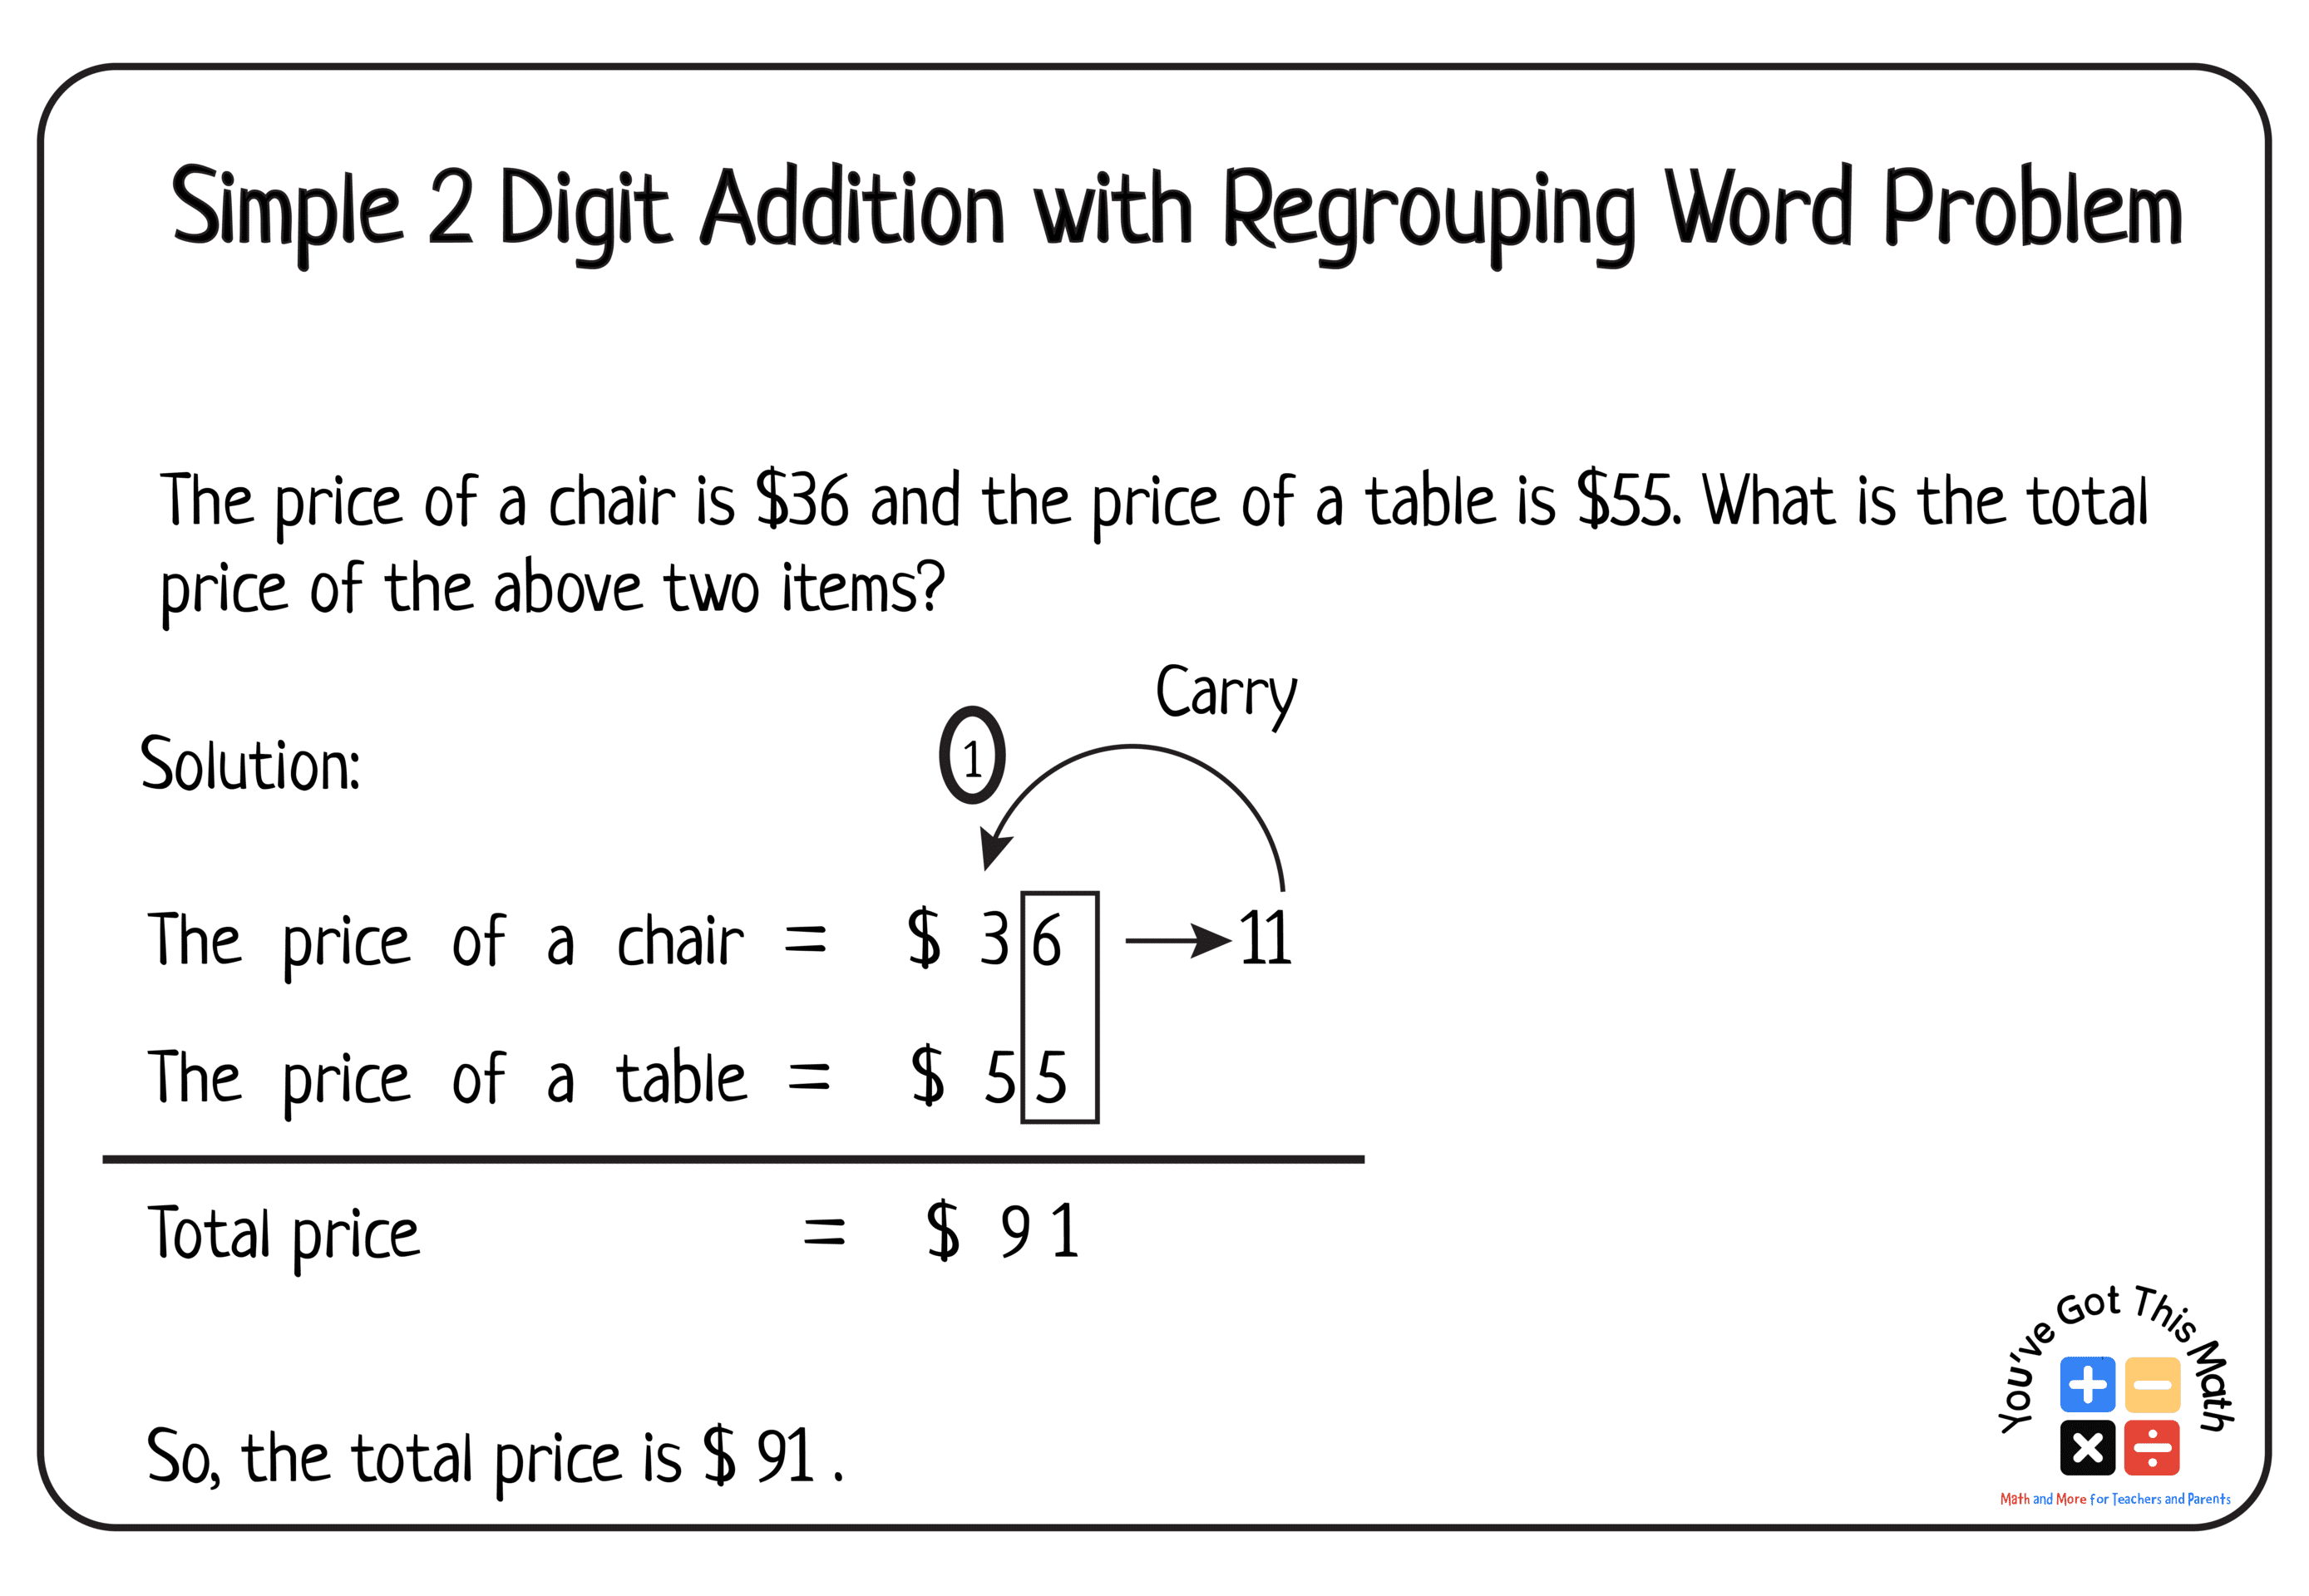 Simple 2 Digit Addition with Regrouping Word Problem.